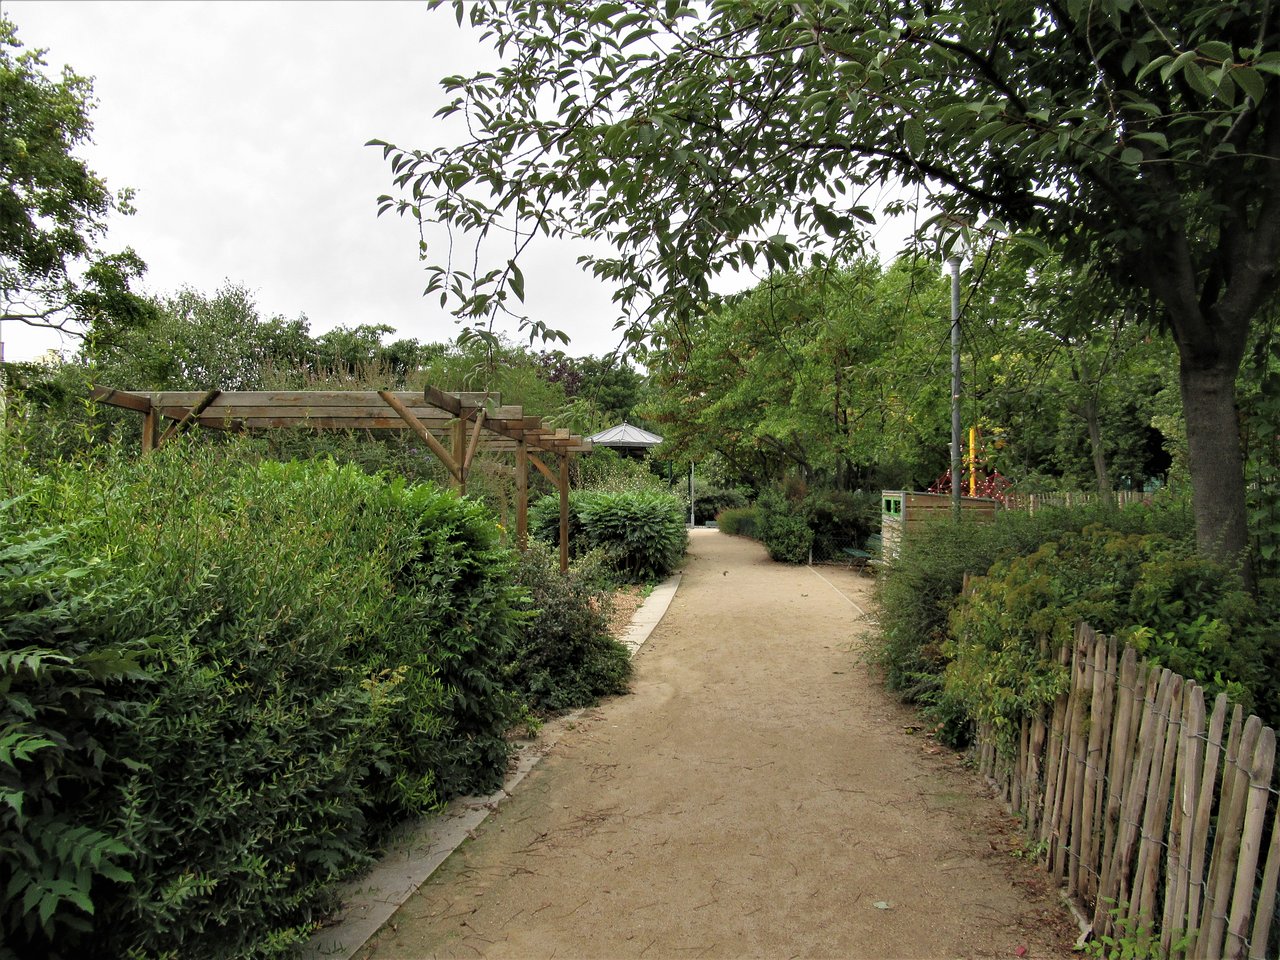 Jardin Martinique Charmant Jardin Villemin Paris 2020 All You Need to Know before